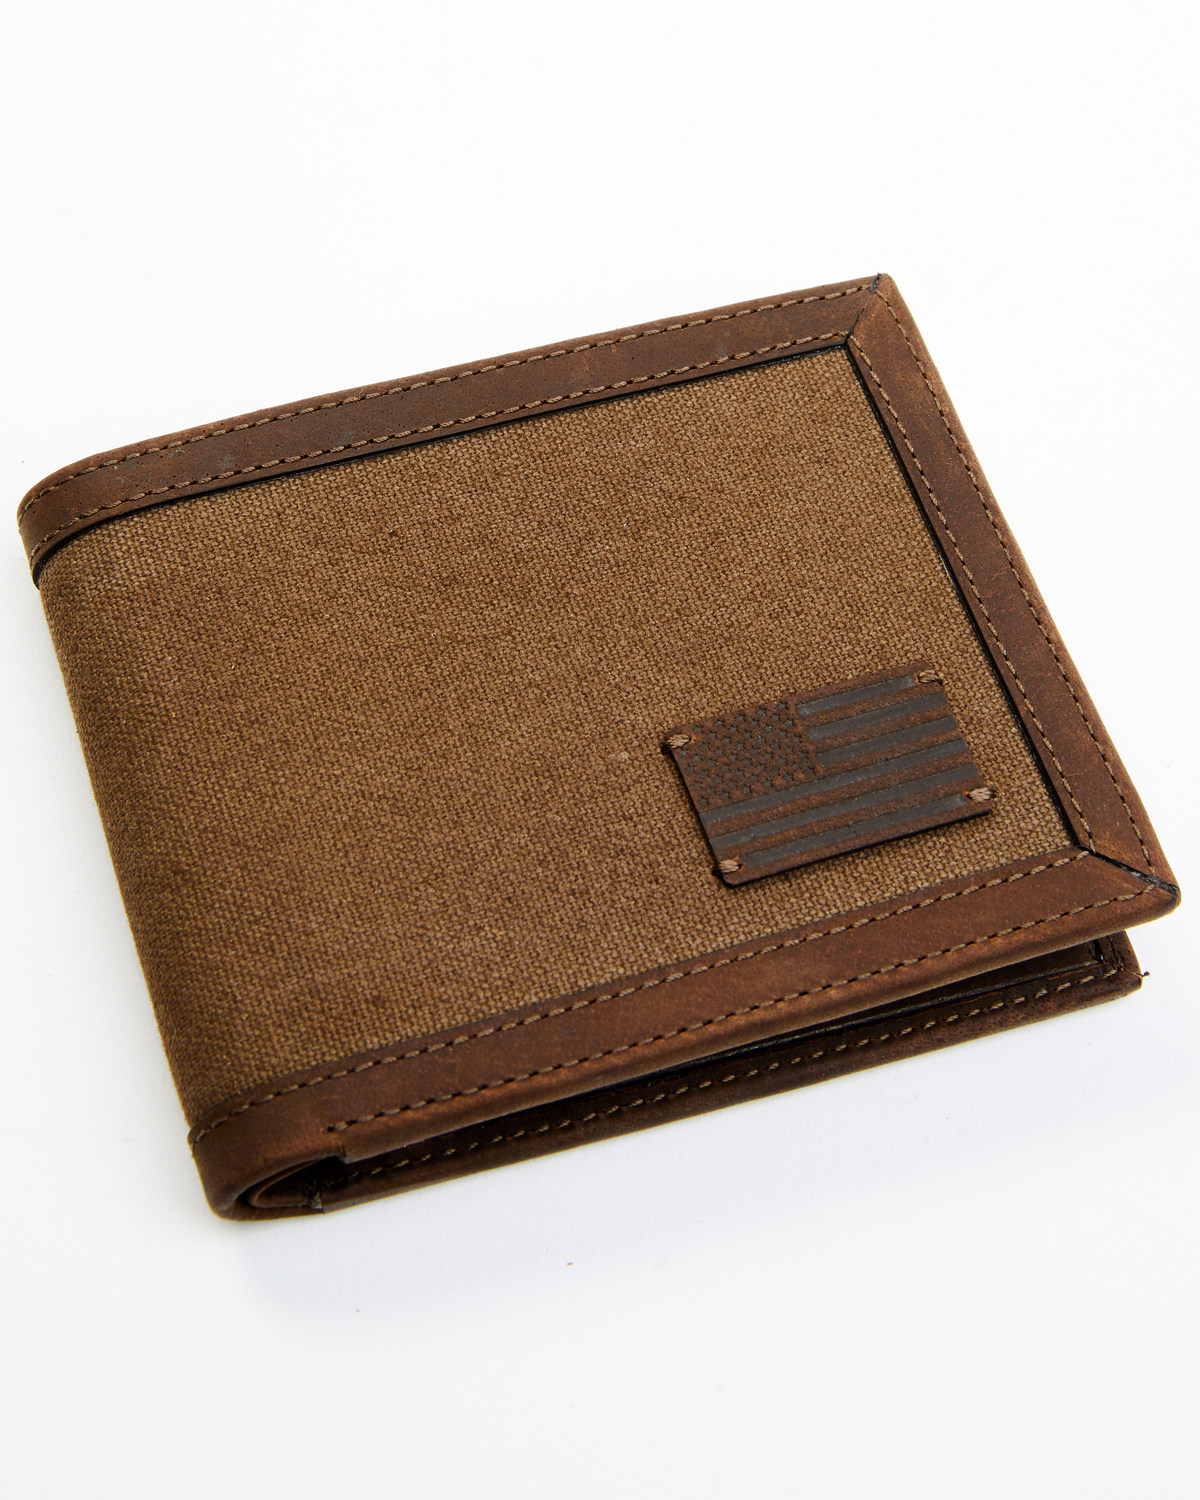 Brothers and Son's Men's Bifold Wallet